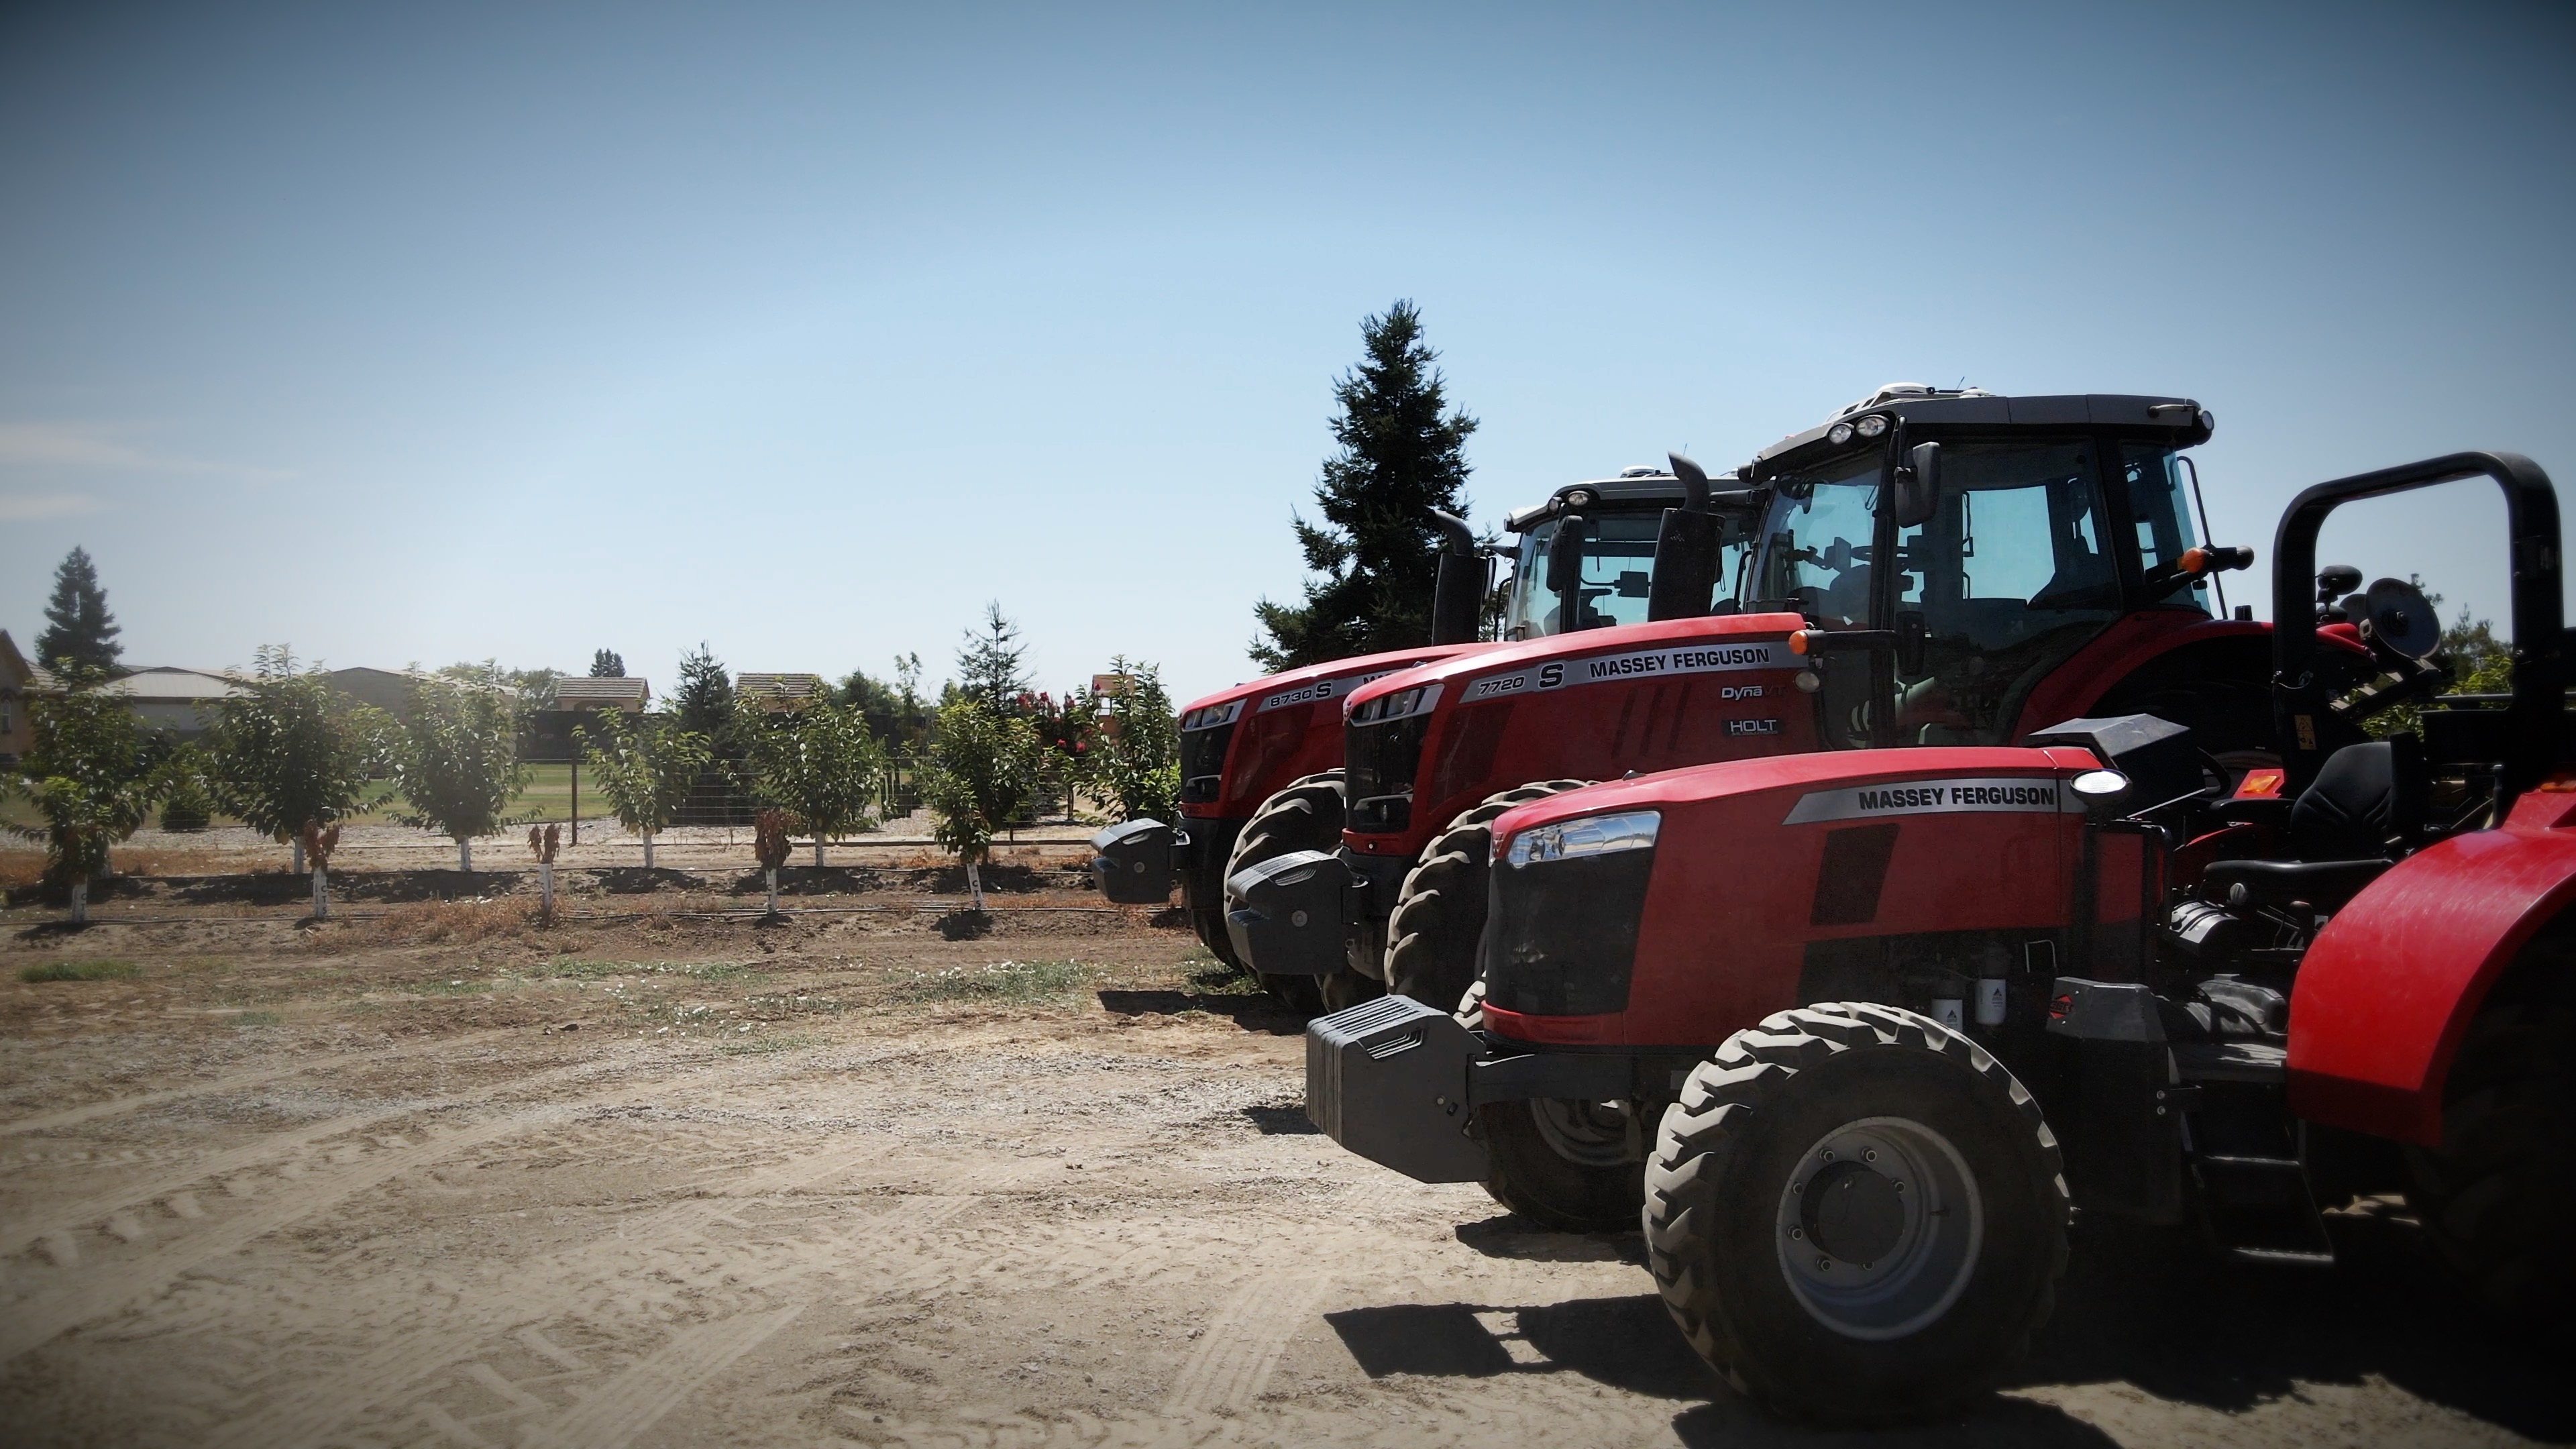 The MF 8730S led to purchase of two more Massey Ferguson tractors for the Copper Ag fleet.